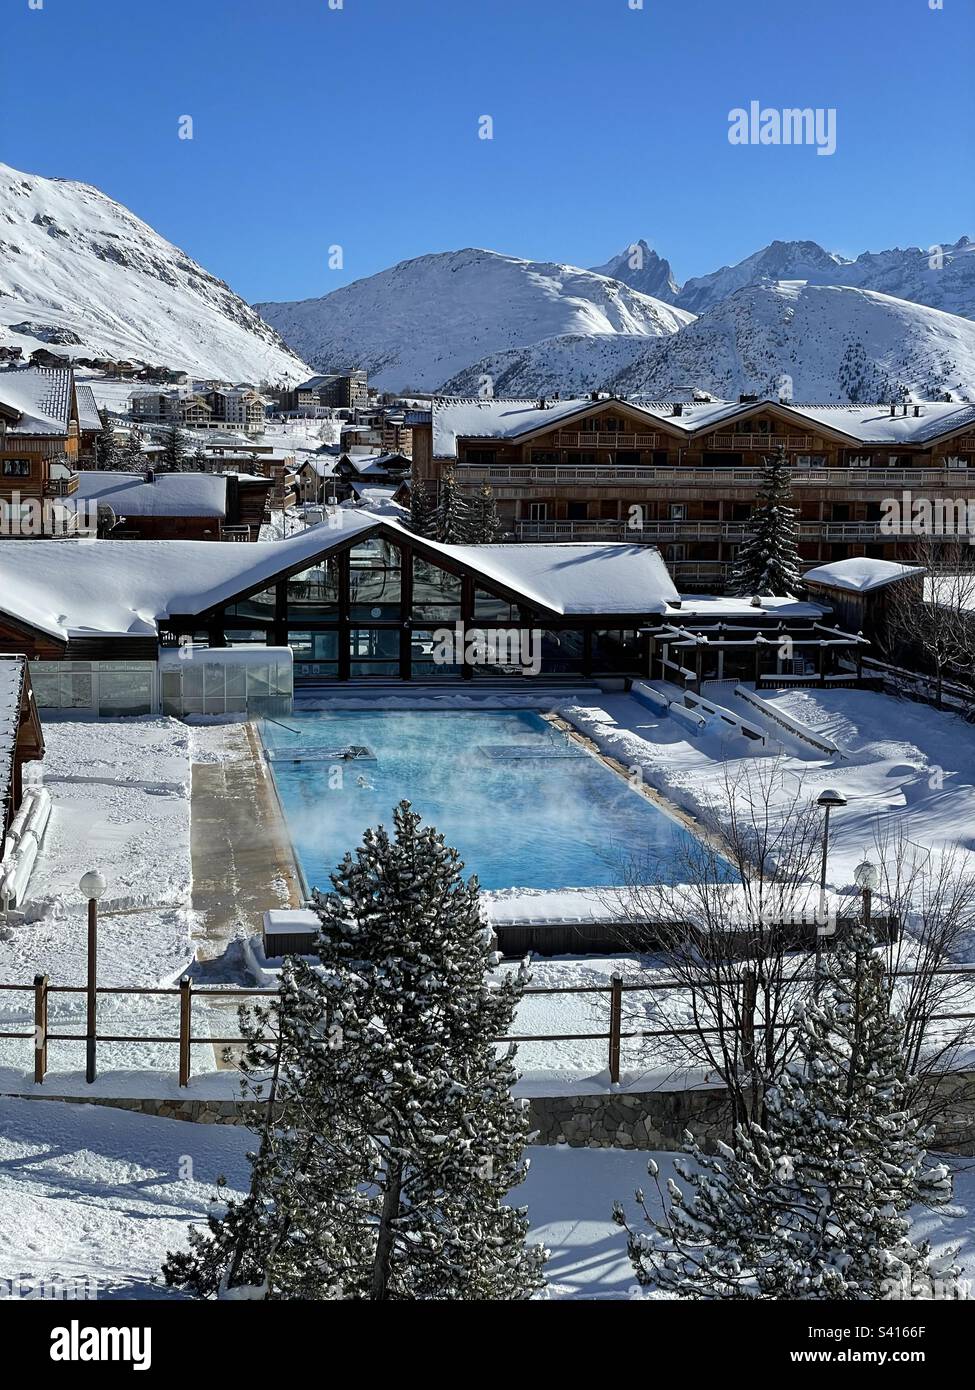 Outdoor swimming pool at Alpe d’Huez, France. Stock Photo